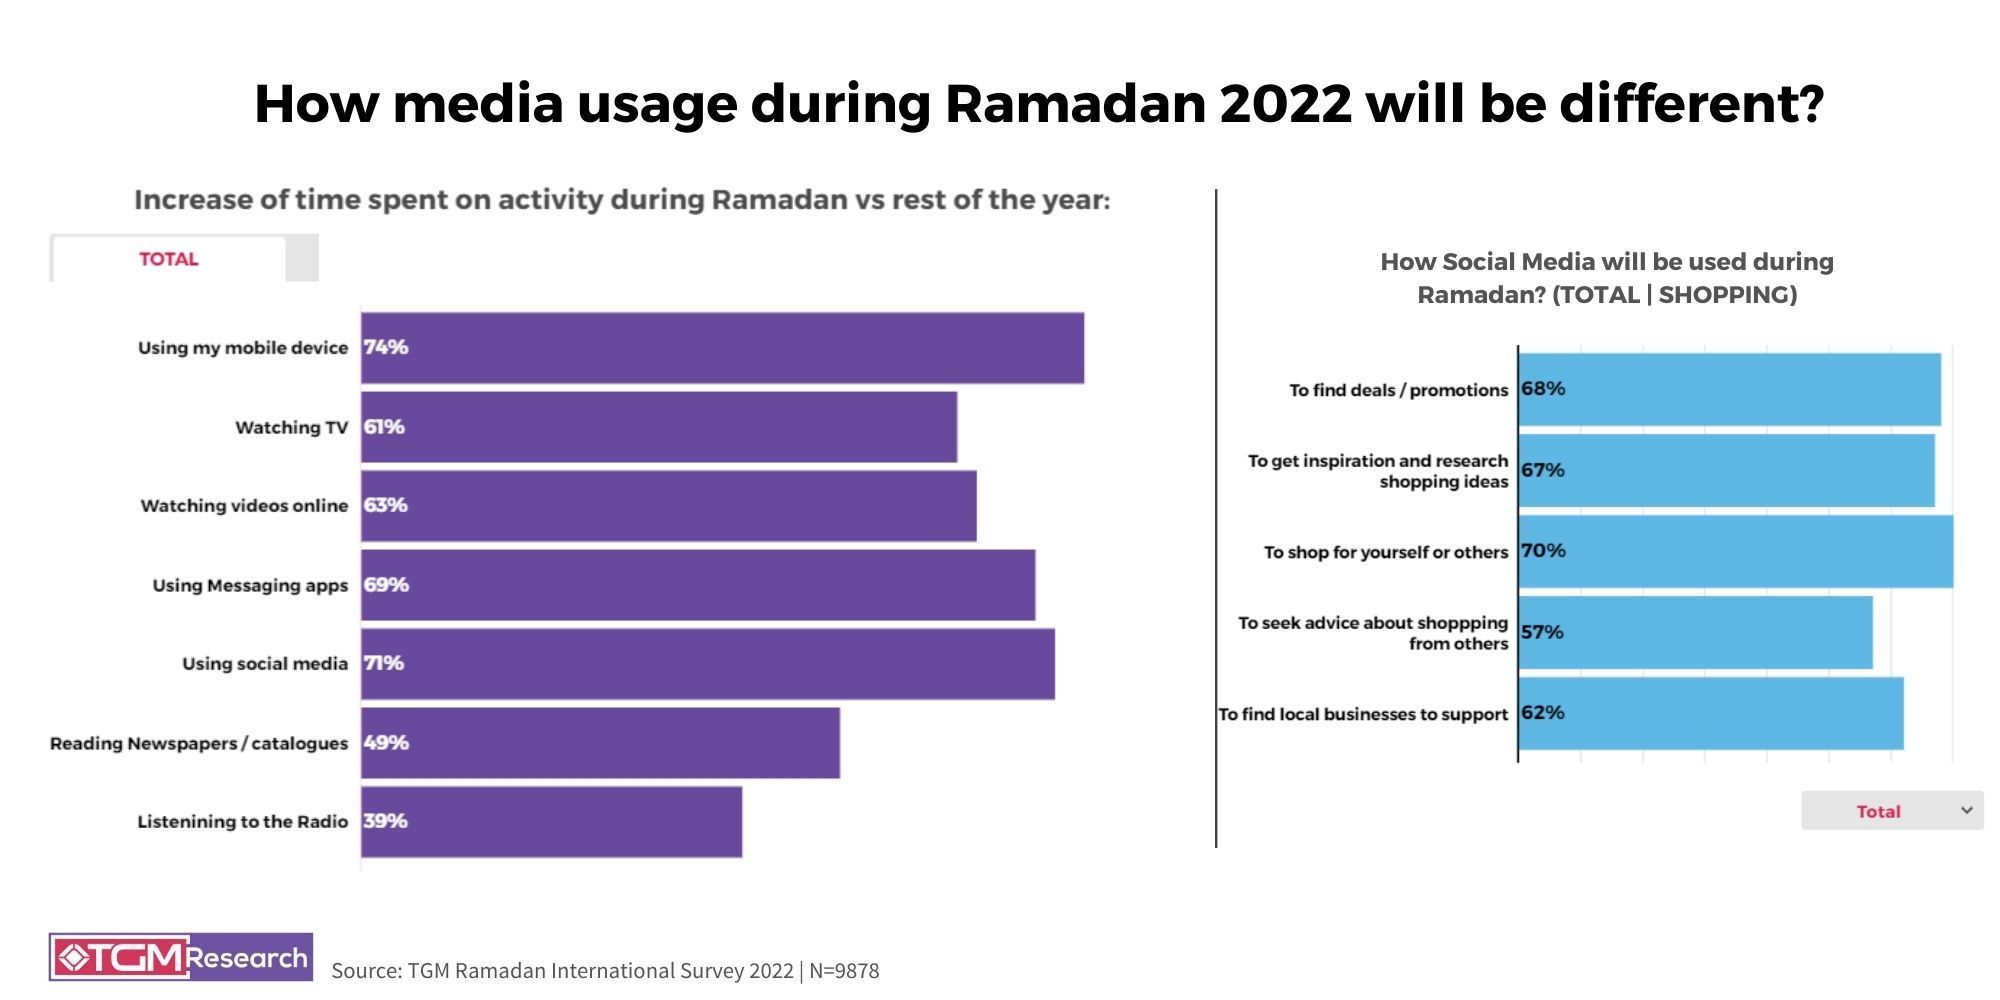 HOW USAGE OF MEDIA IN RAMADAN 2022 WILL BE DIFFERENT?